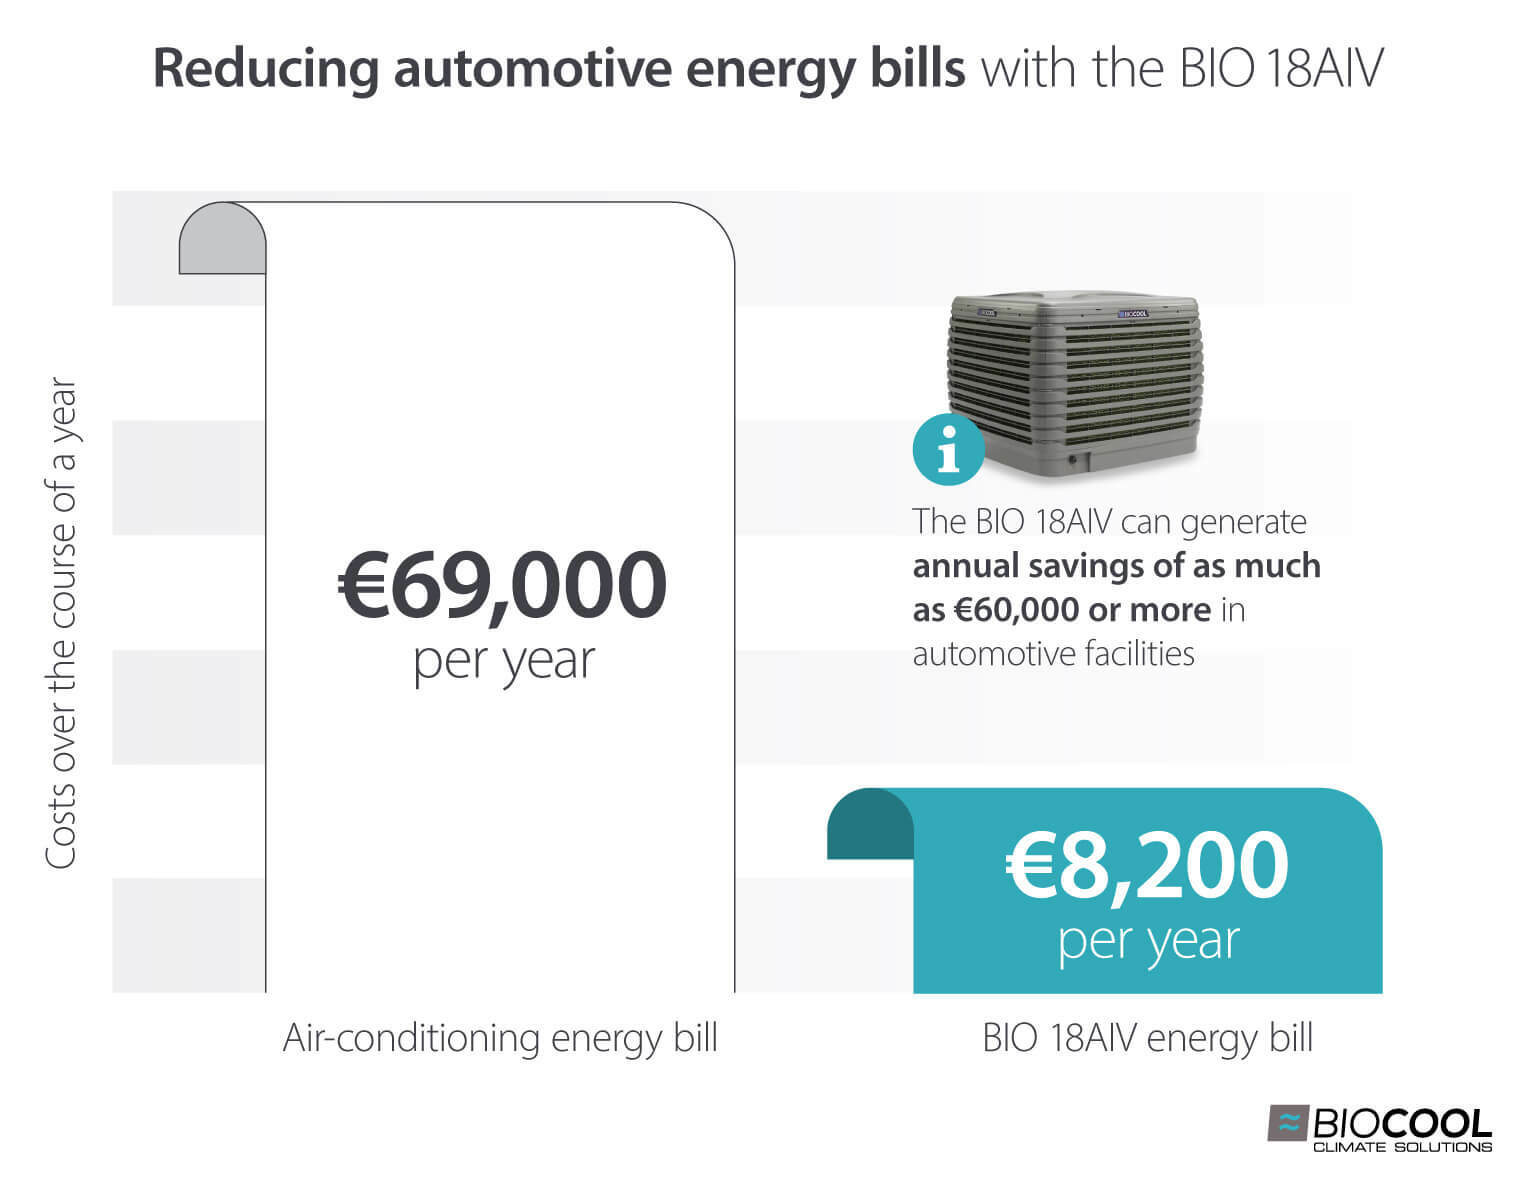 How evaporative coolers can save automotive industry companies €60,000 per year compared to air conditioning - Infographic image